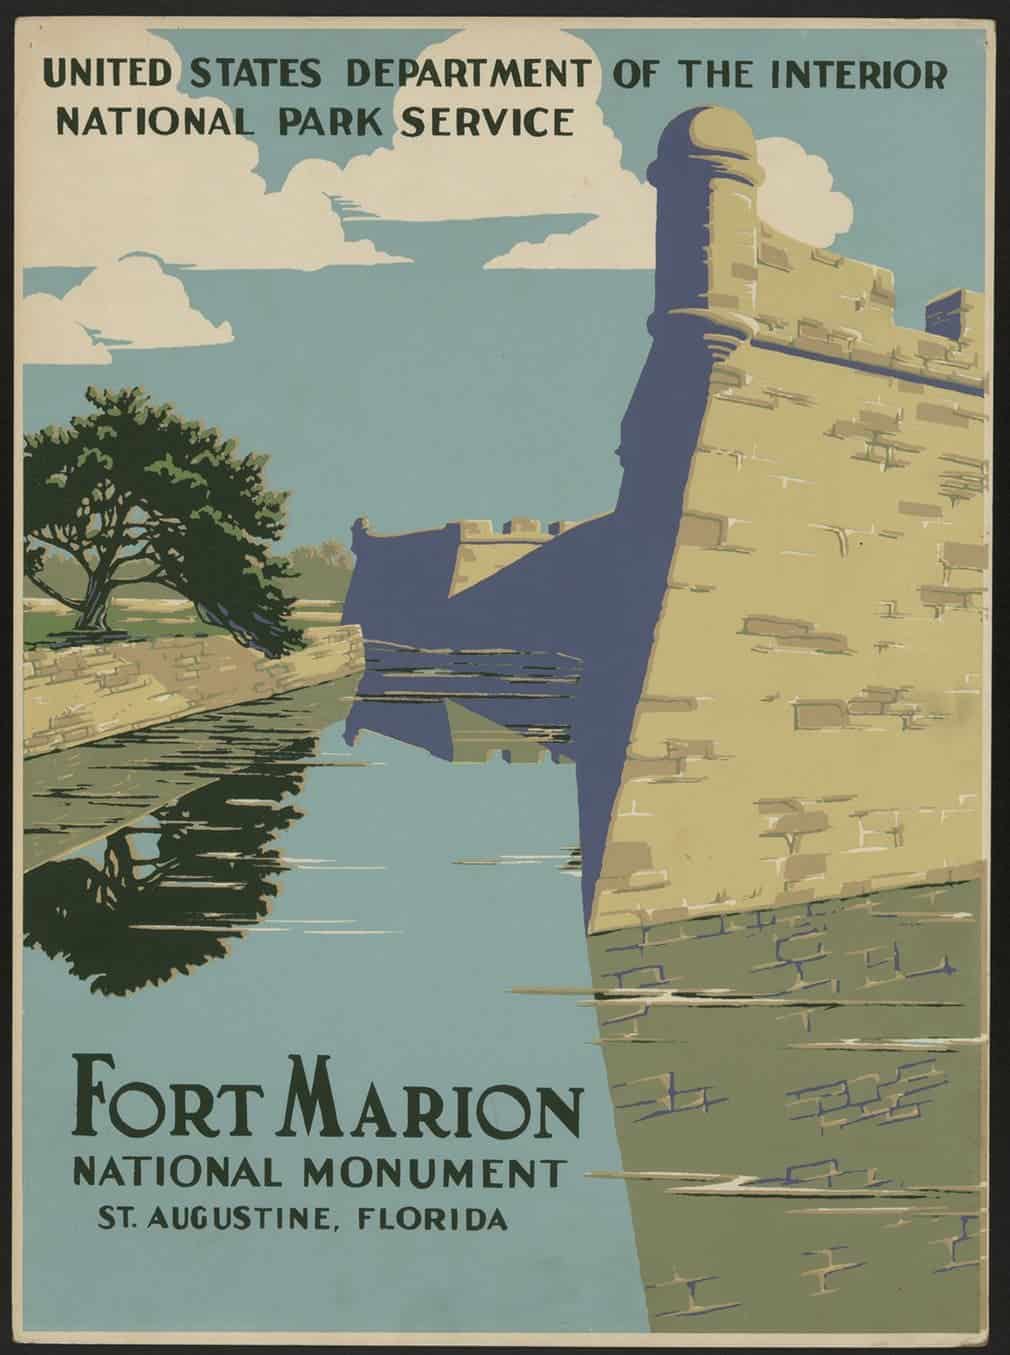 Fort Marion in Florida, 1938.